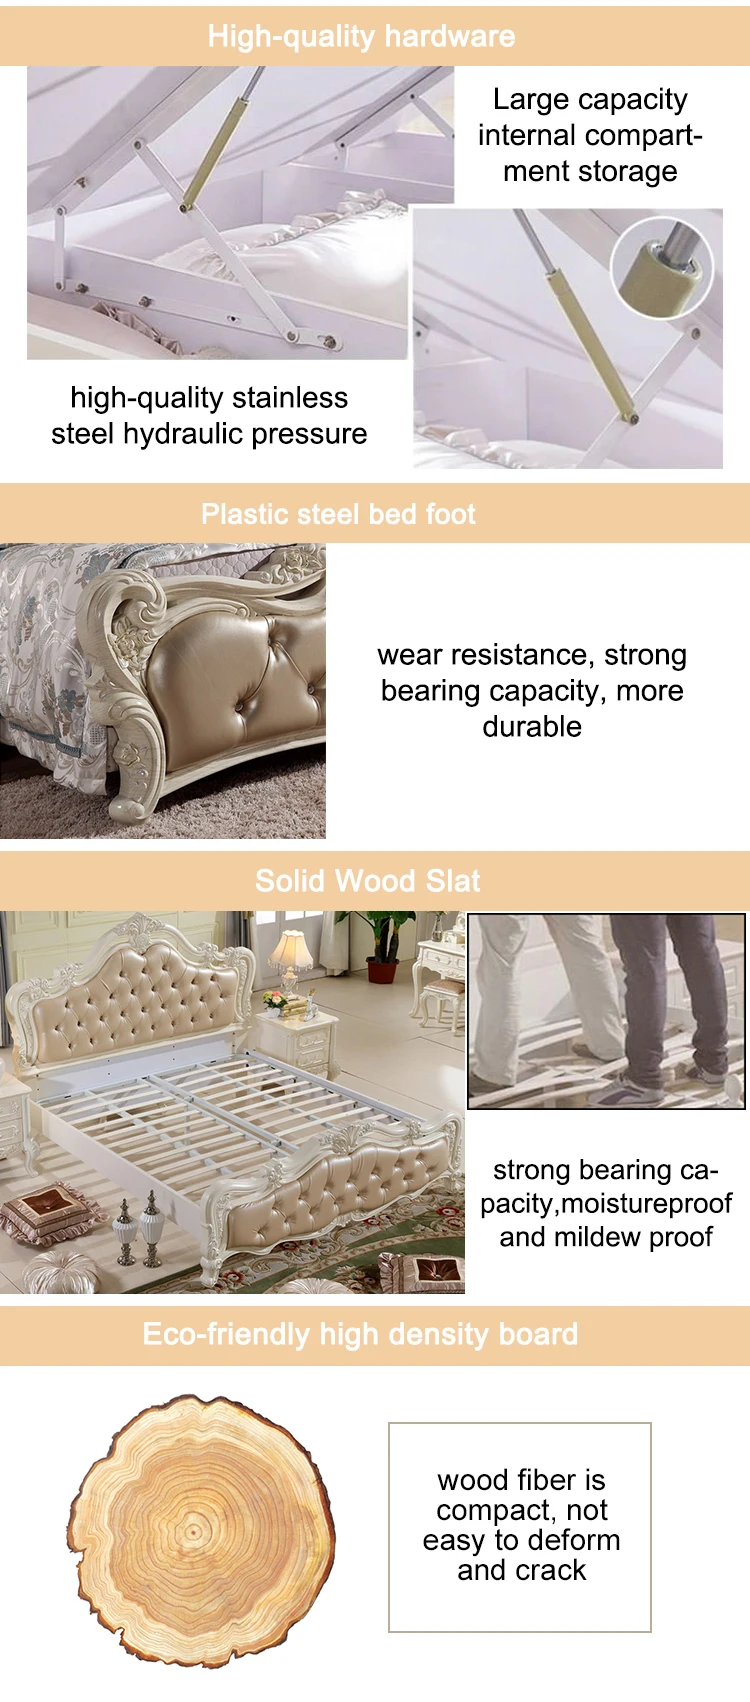 King Size Sets Mattress Bed Room Set Royal Wooden Prices Bedroom Furniture Luxury